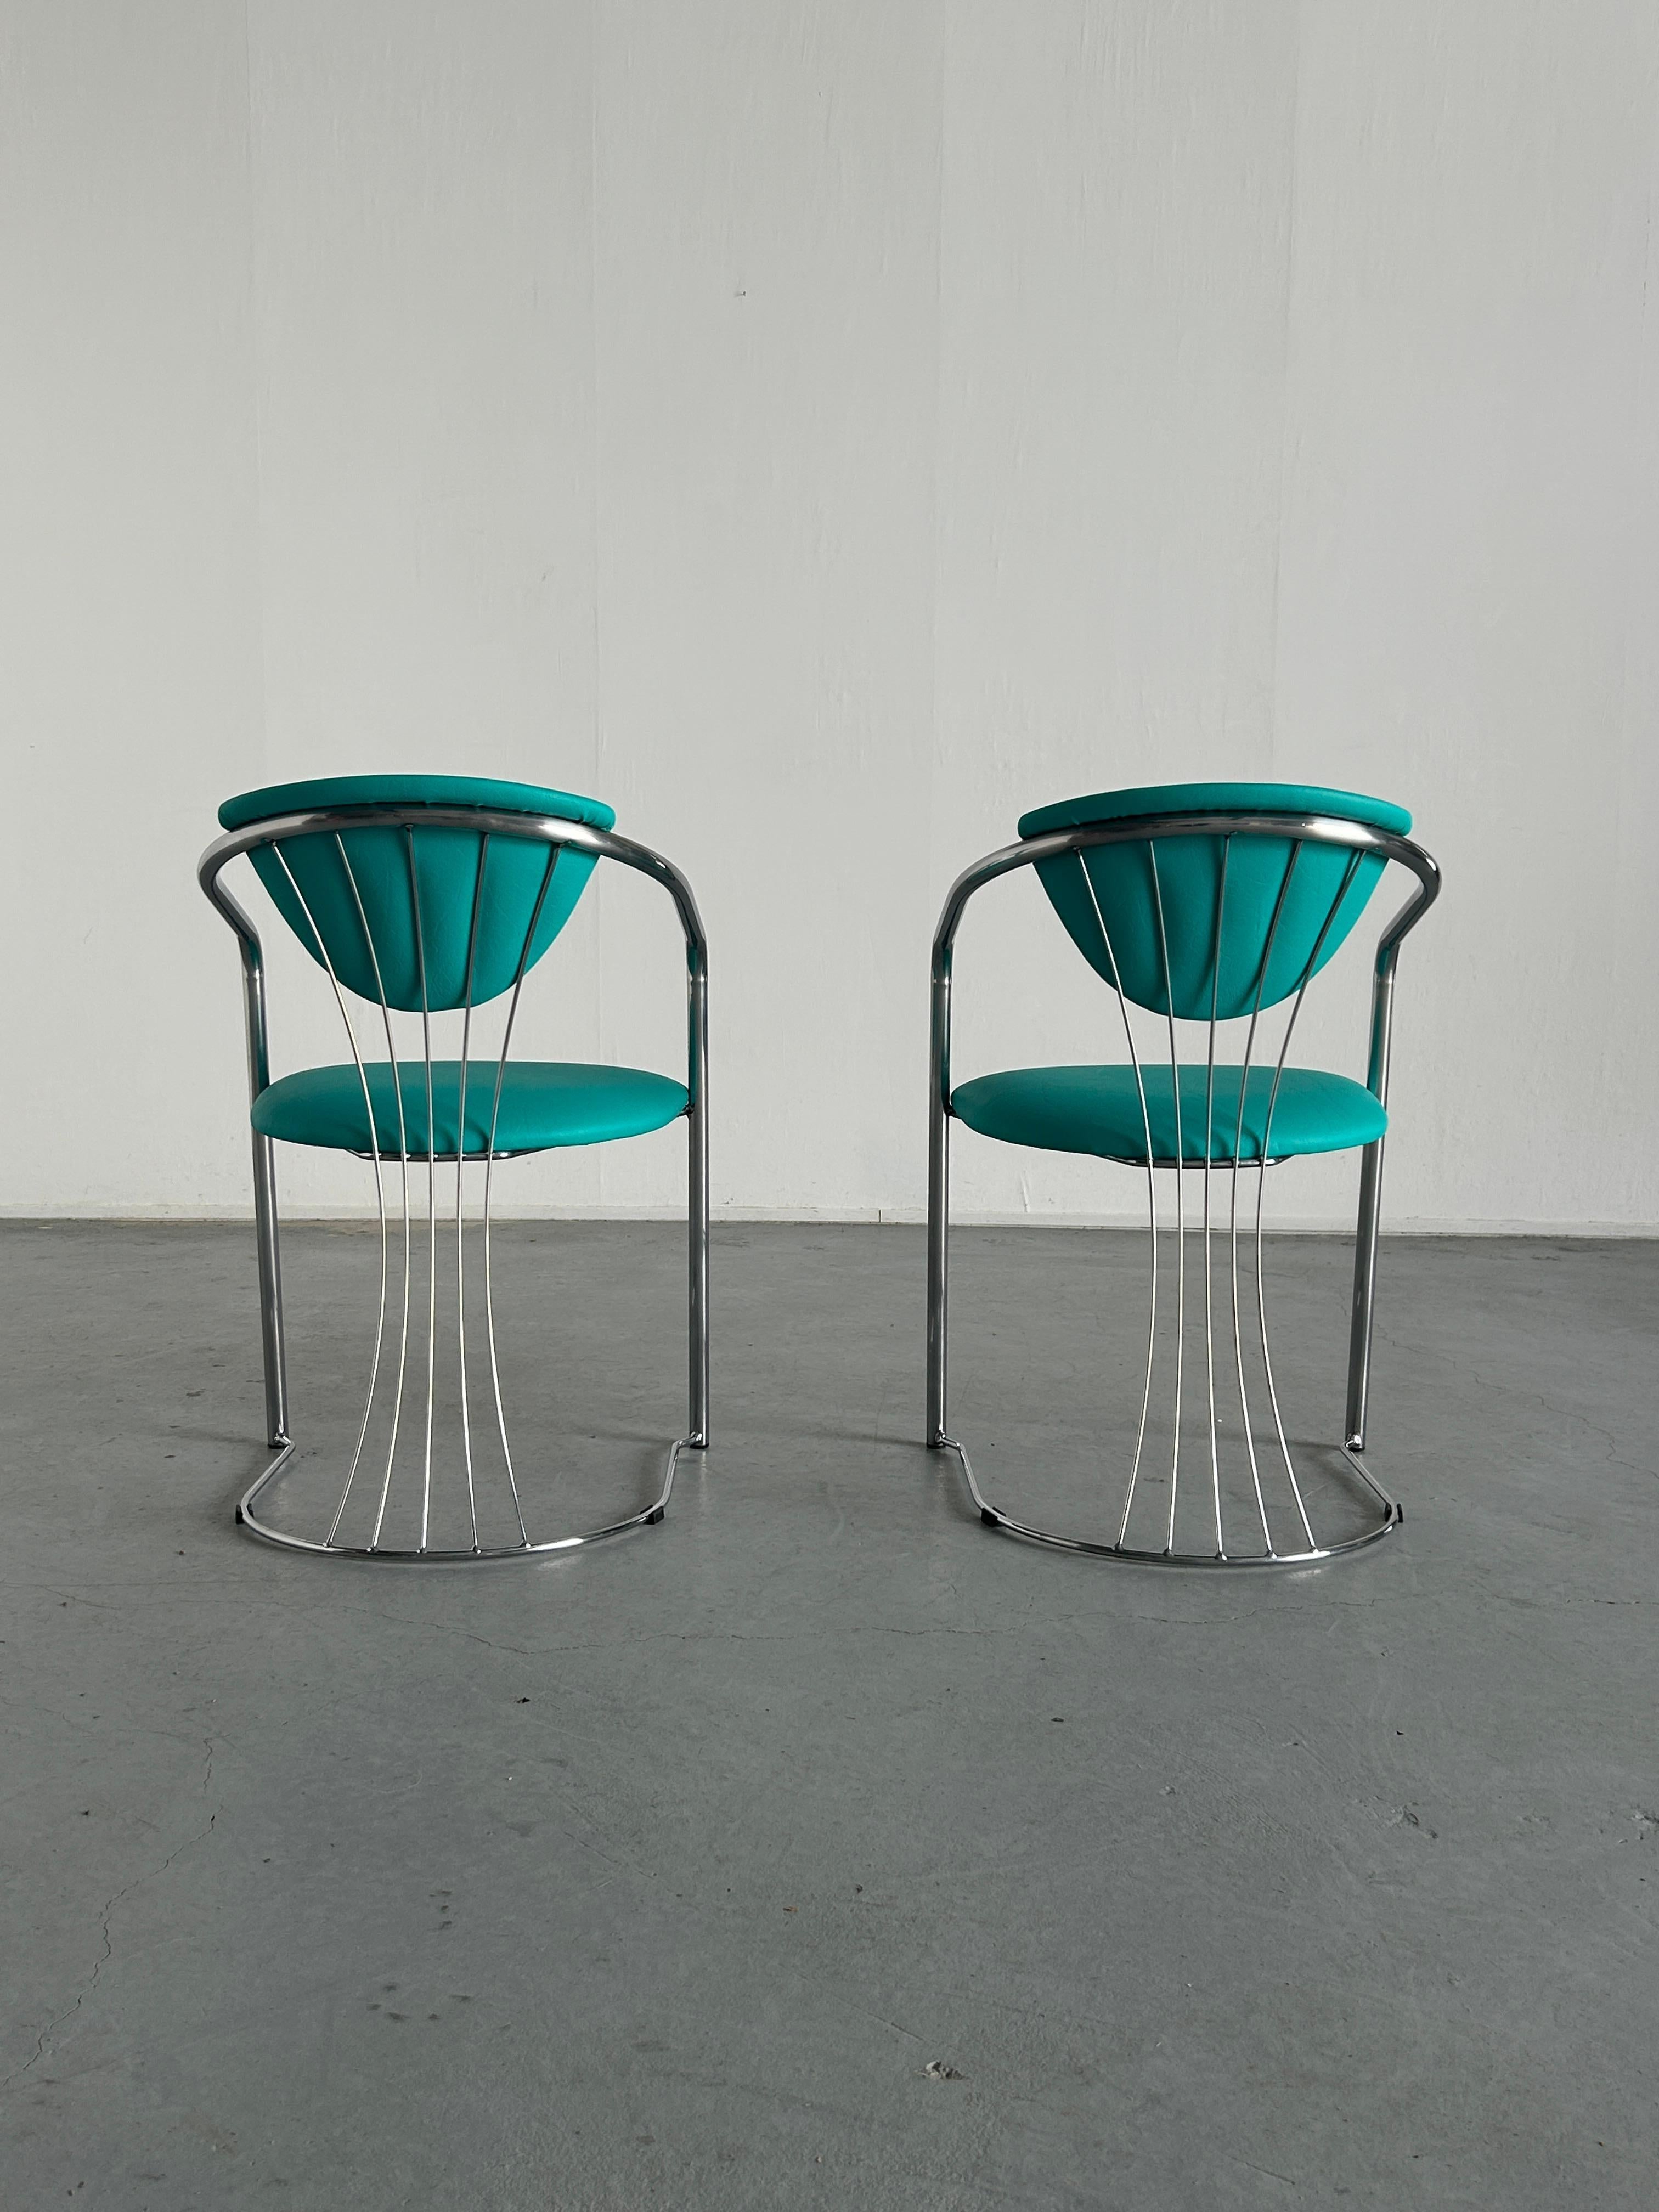 Late 20th Century 1 of 2 Vintage Steel and Mint Green Faux Leather Dining Chairs by Effezeta, 90s For Sale